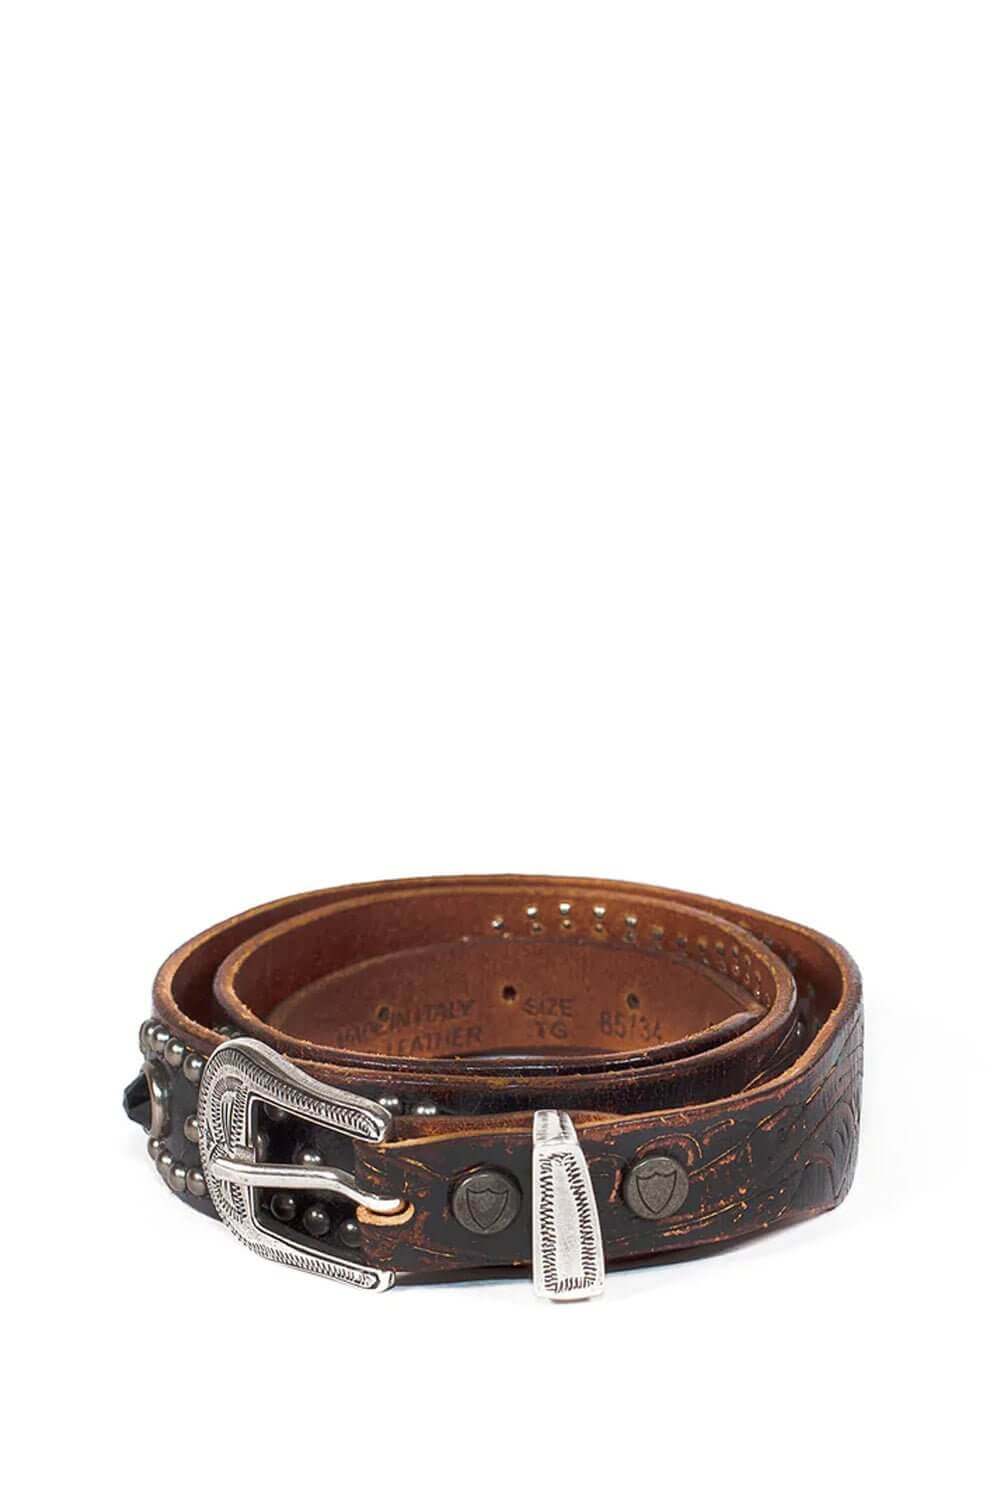 GLENDALE BELT Brown leather belt with studs and rhinestones. Carved buckle. Height: 3 cm. Made in Italy. HTC LOS ANGELES